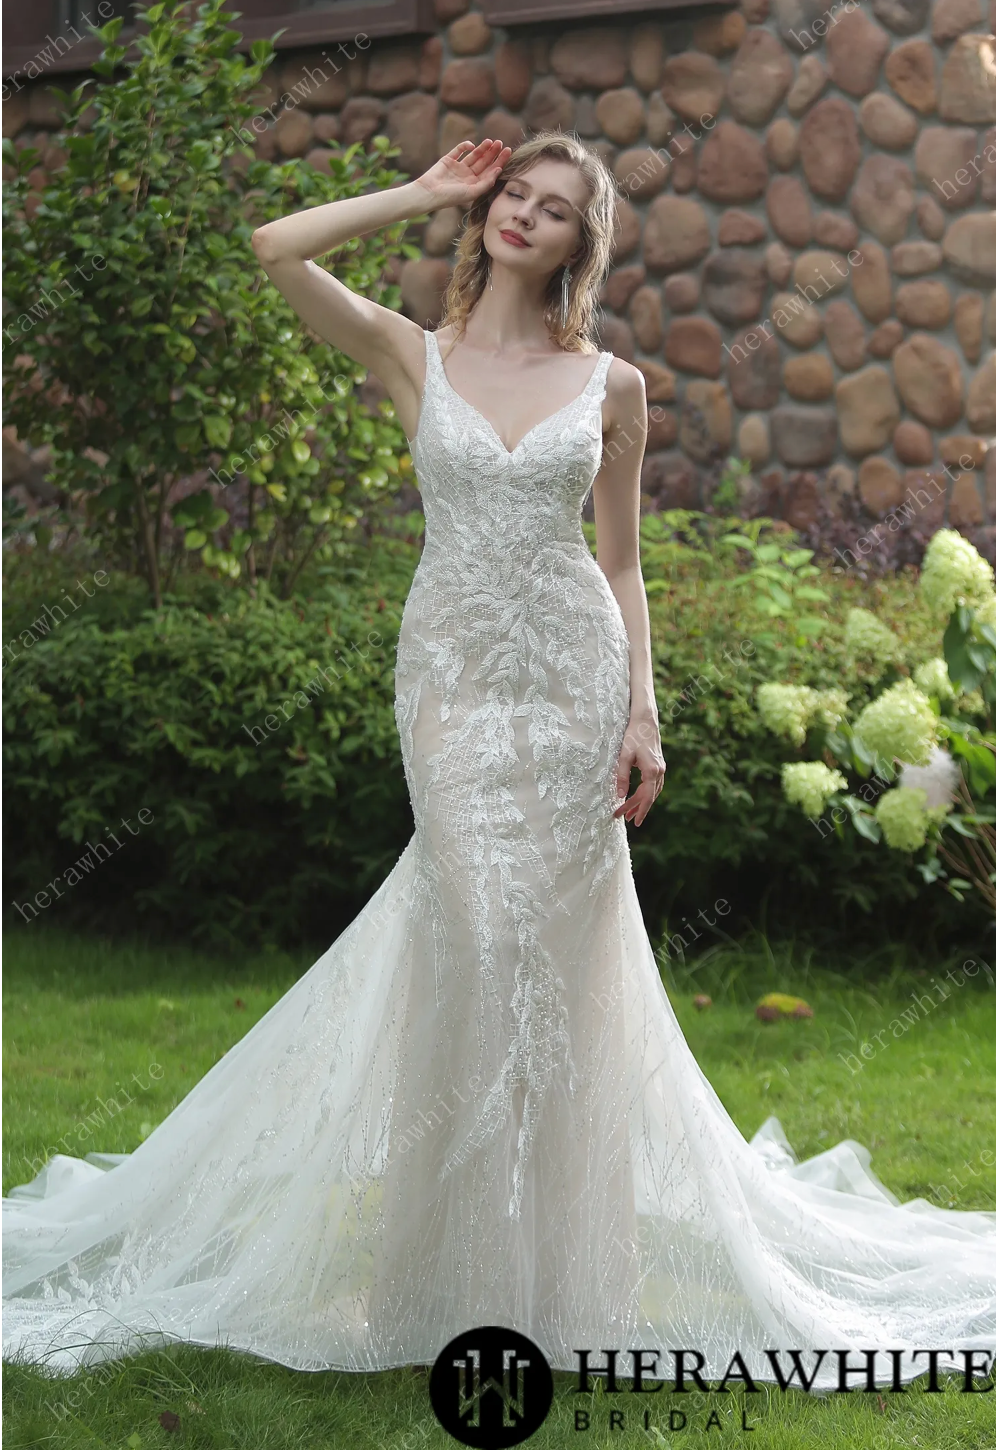 Stunning Mermaid Wedding Dress With Embroidered Appliqués